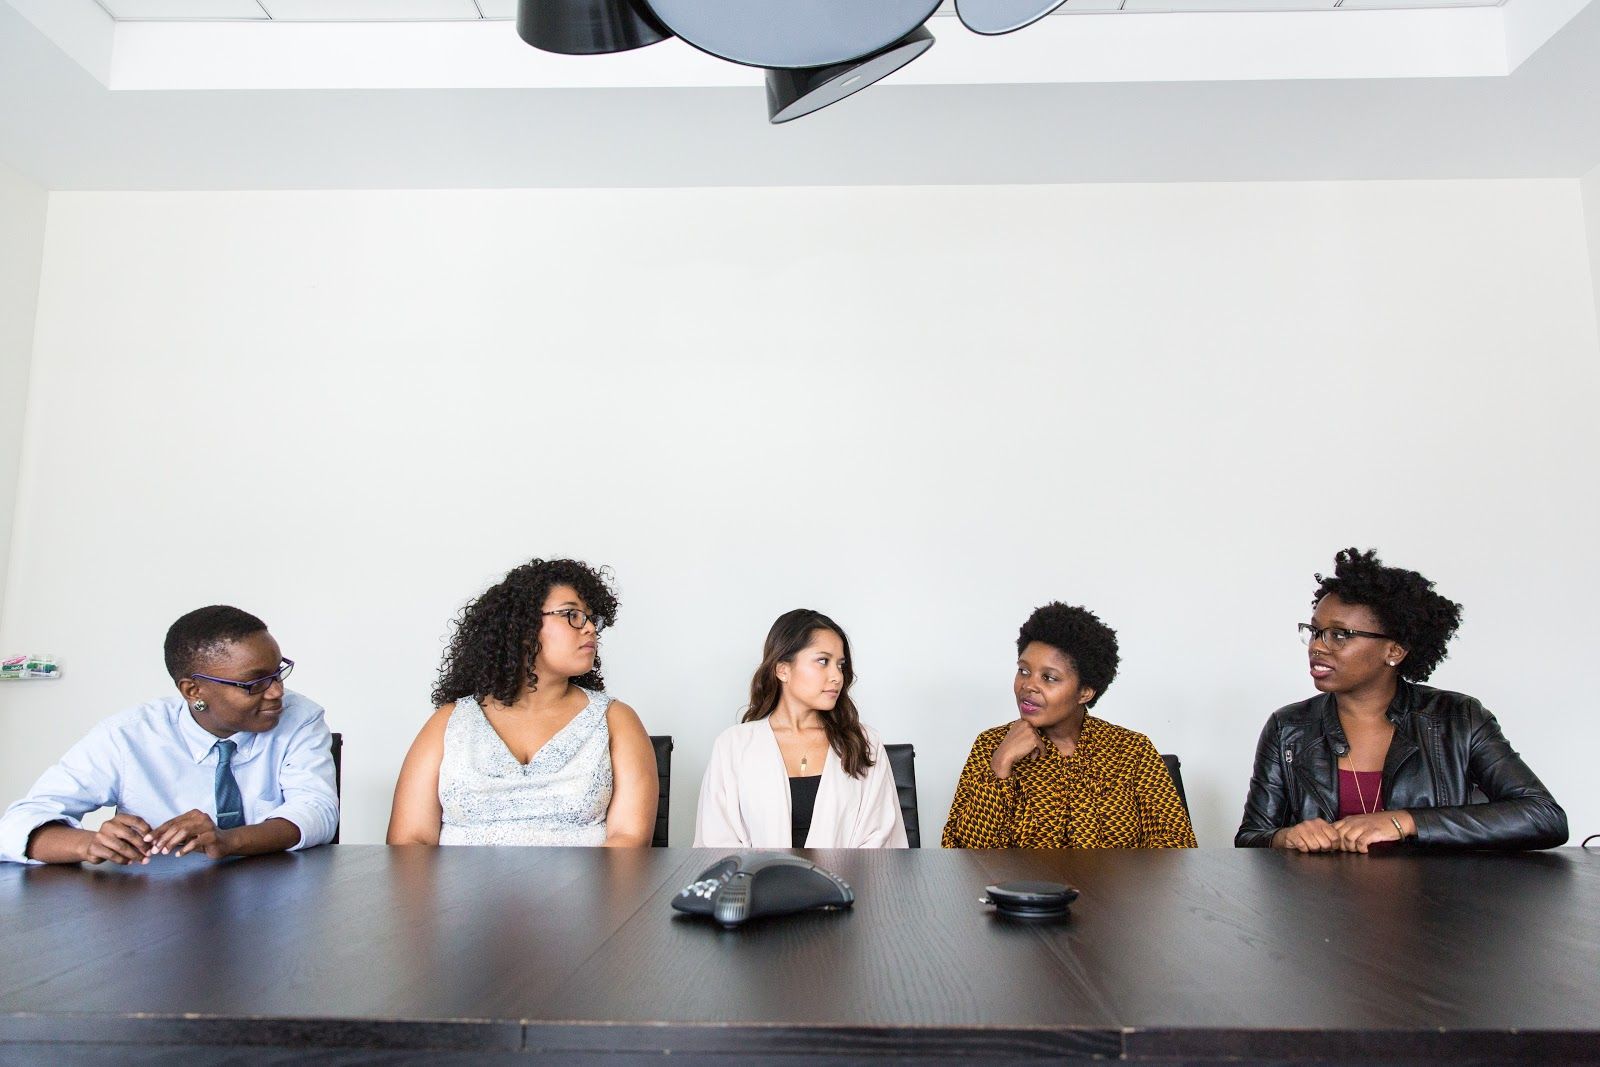 How managers can provide racial inclusion in the workplace